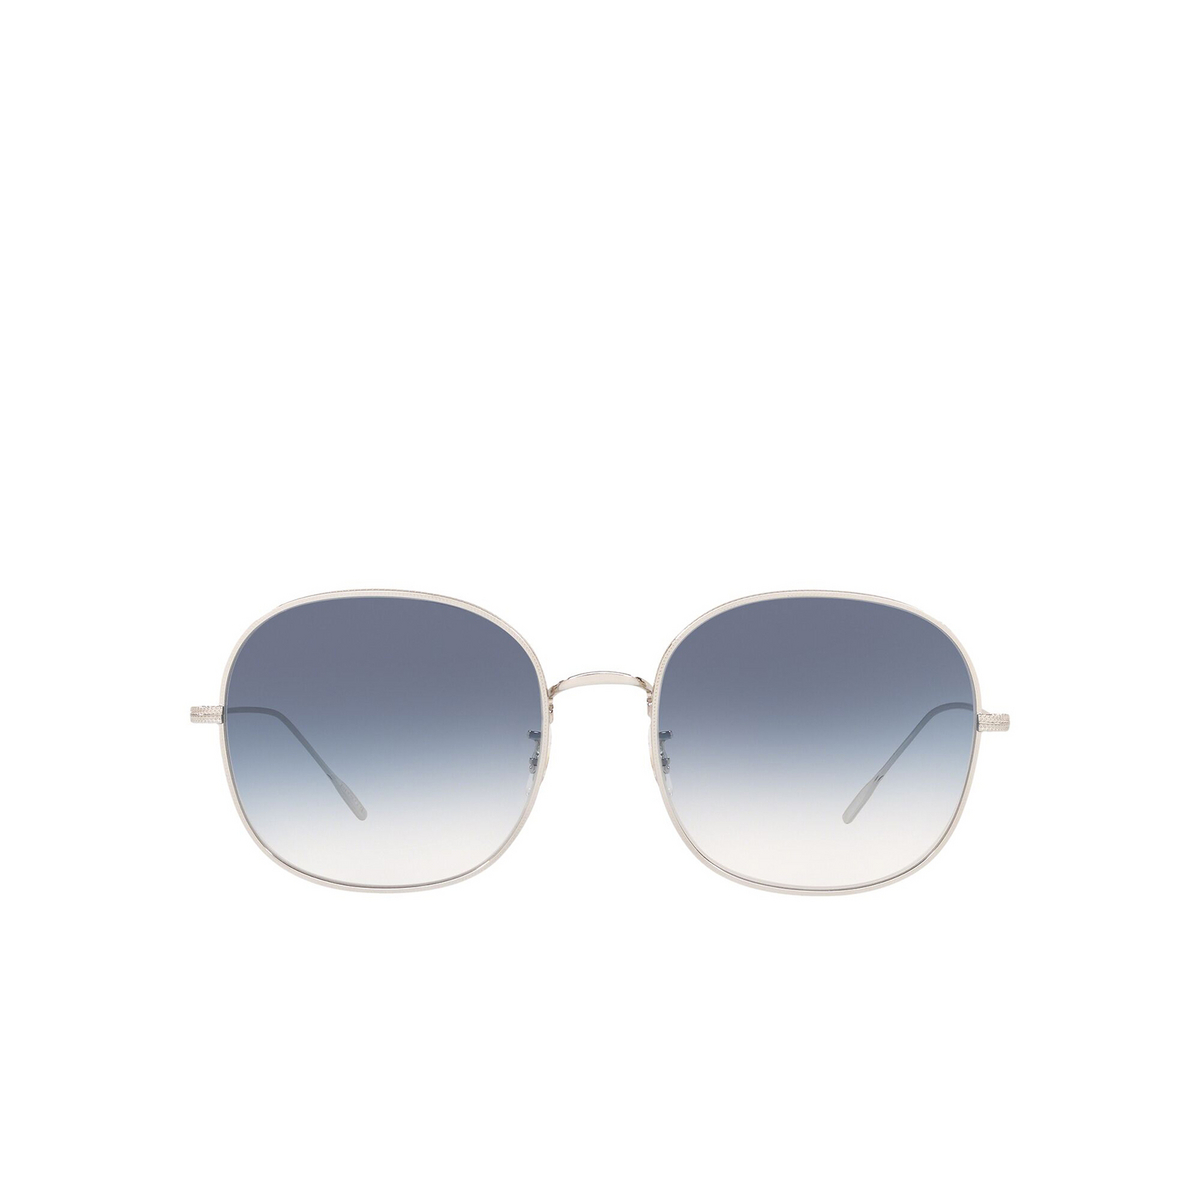 Oliver Peoples® Round Sunglasses: Mehrie OV1255S color Silver 503619 - front view.